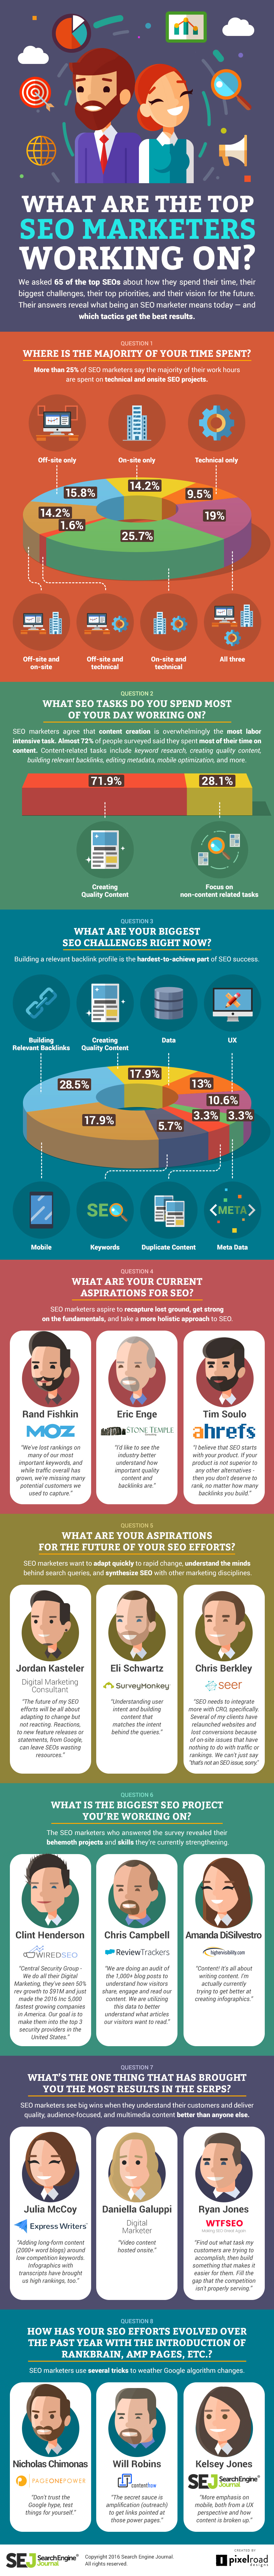 Inforgraphic WHAT ARE THE TOP SEO MARKETERS WORKING ON?